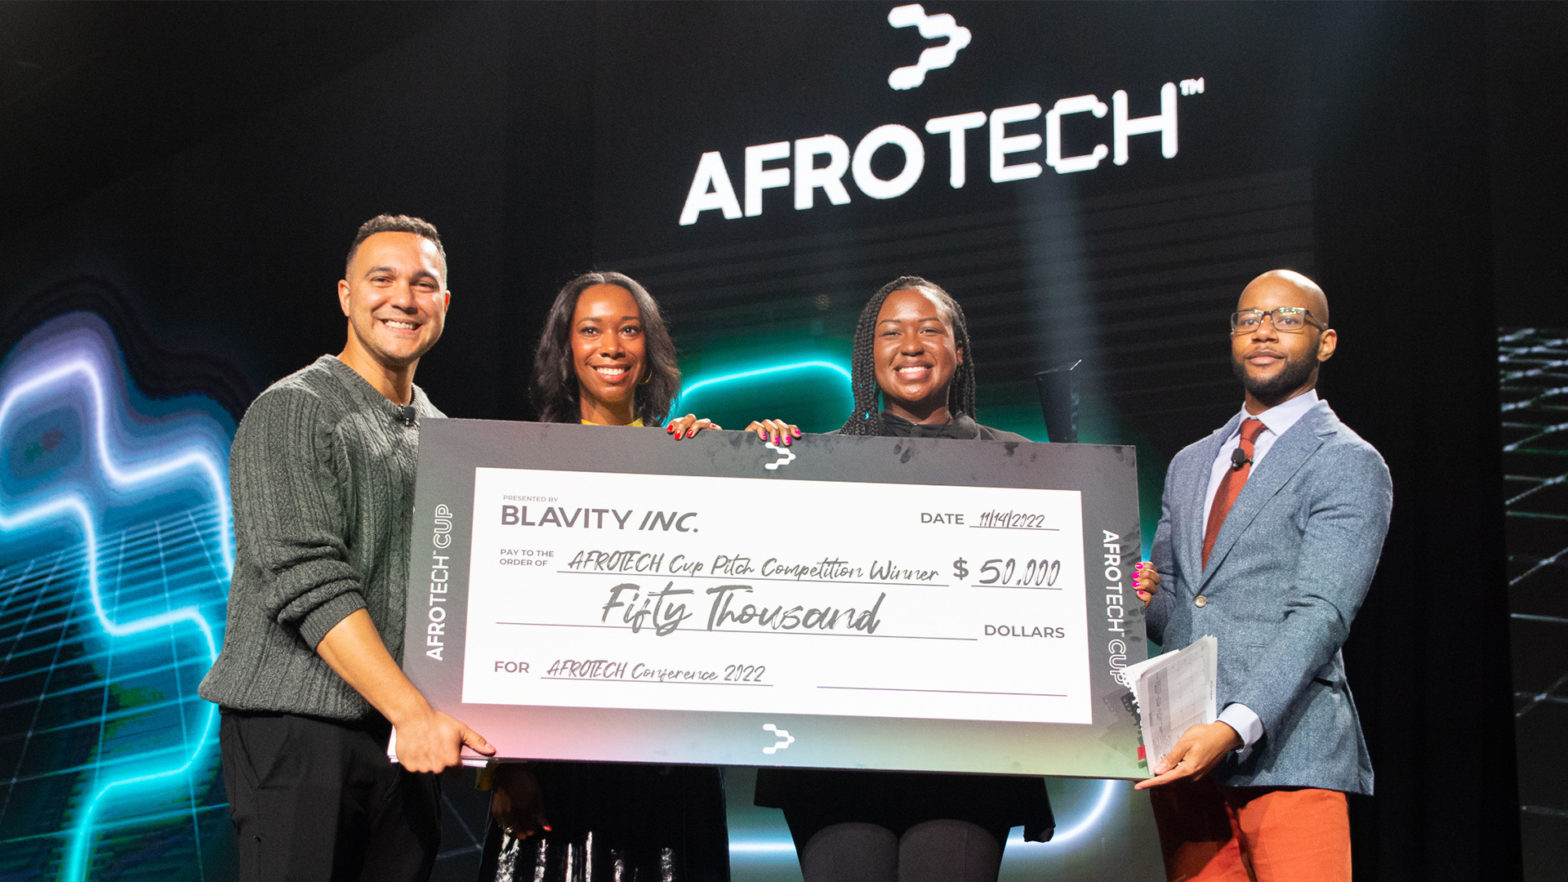 These Innovative Founders Won Big At AfroTech Conference 2022 Pitch Competitions